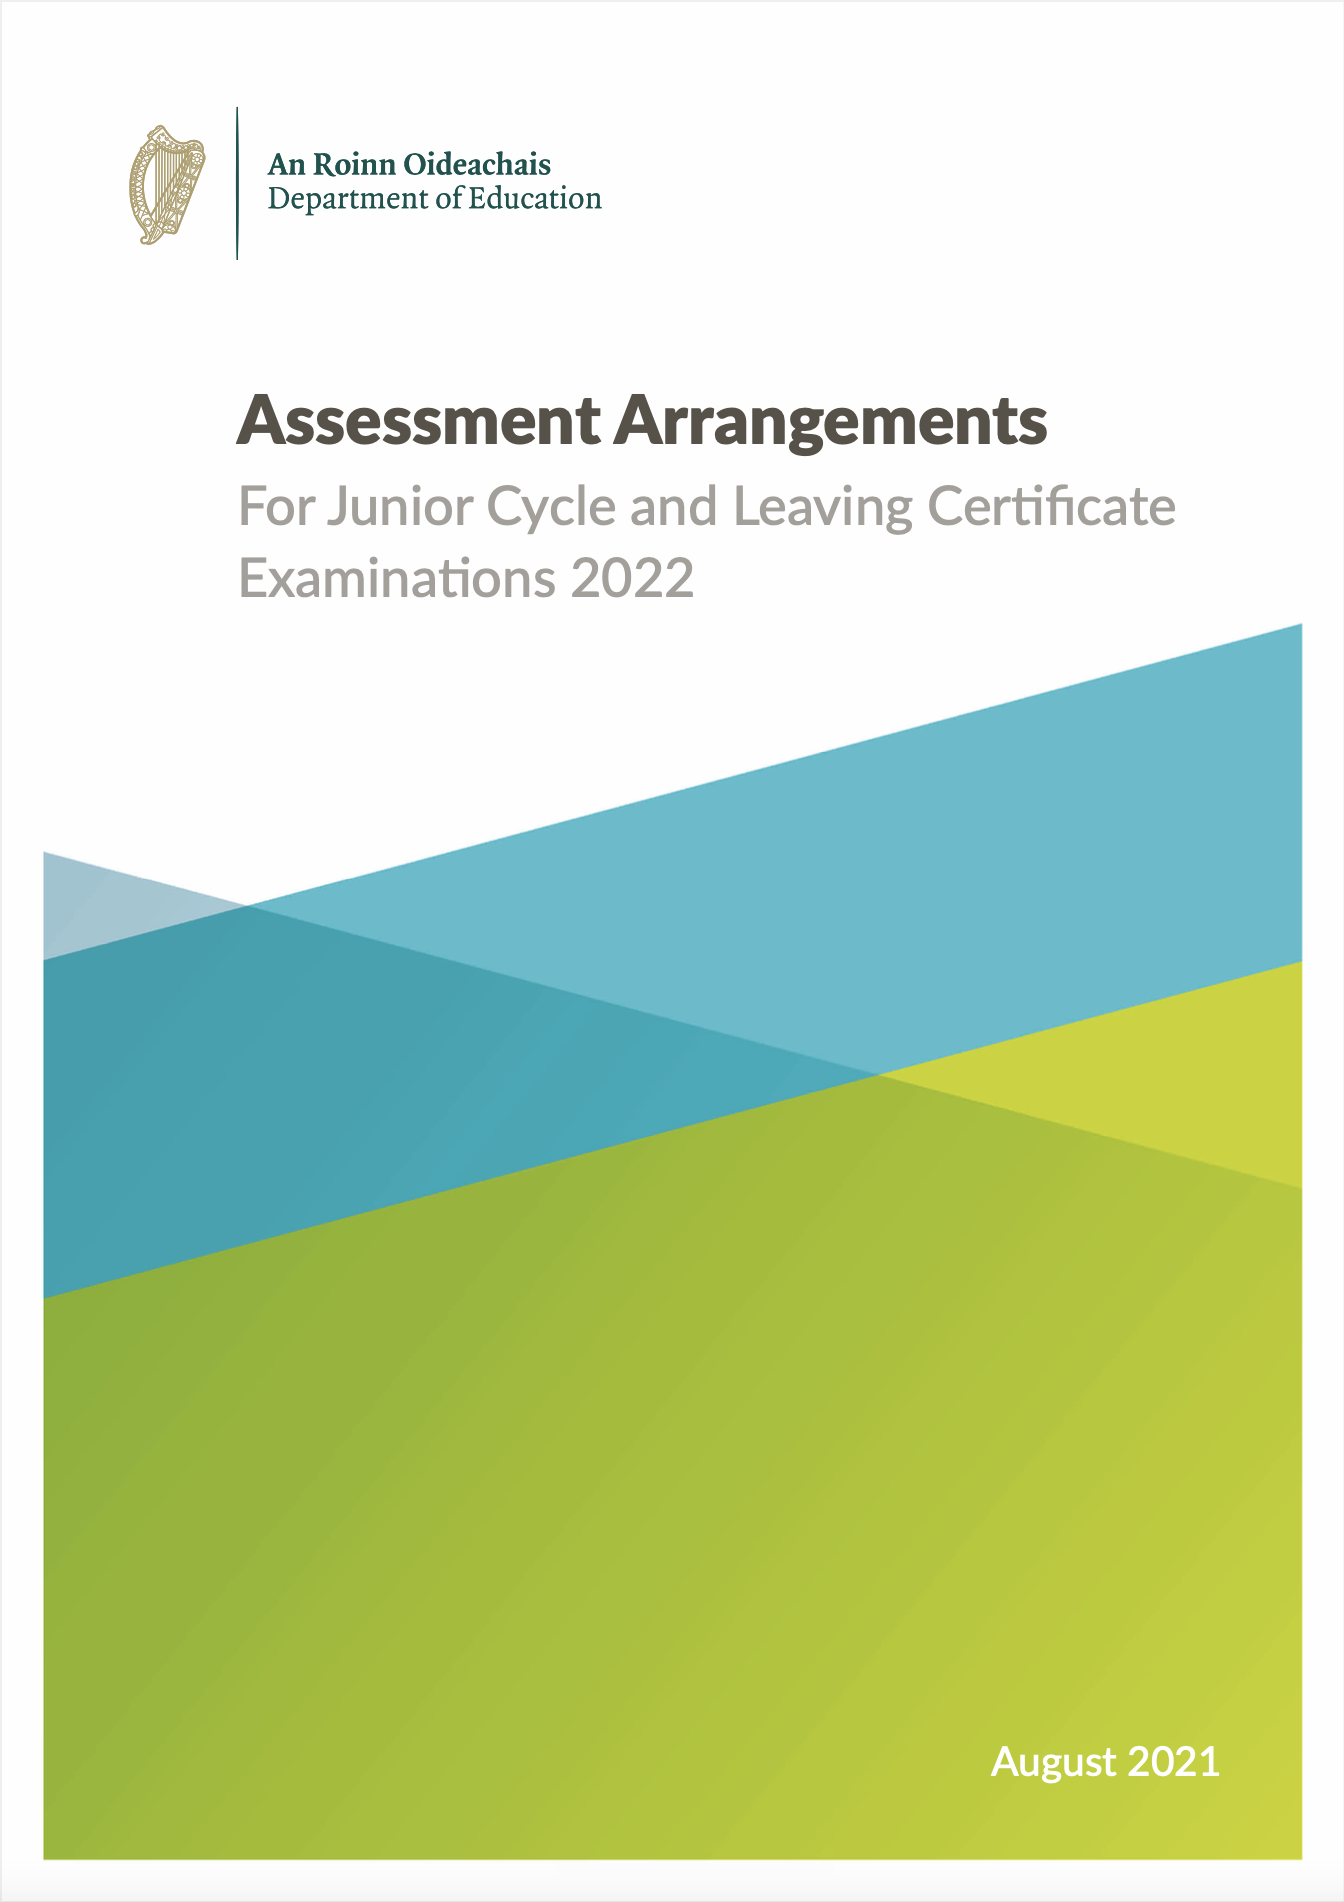 Assessment Arrangements for Junior Cycle and Leaving Certificate Examinations 2022